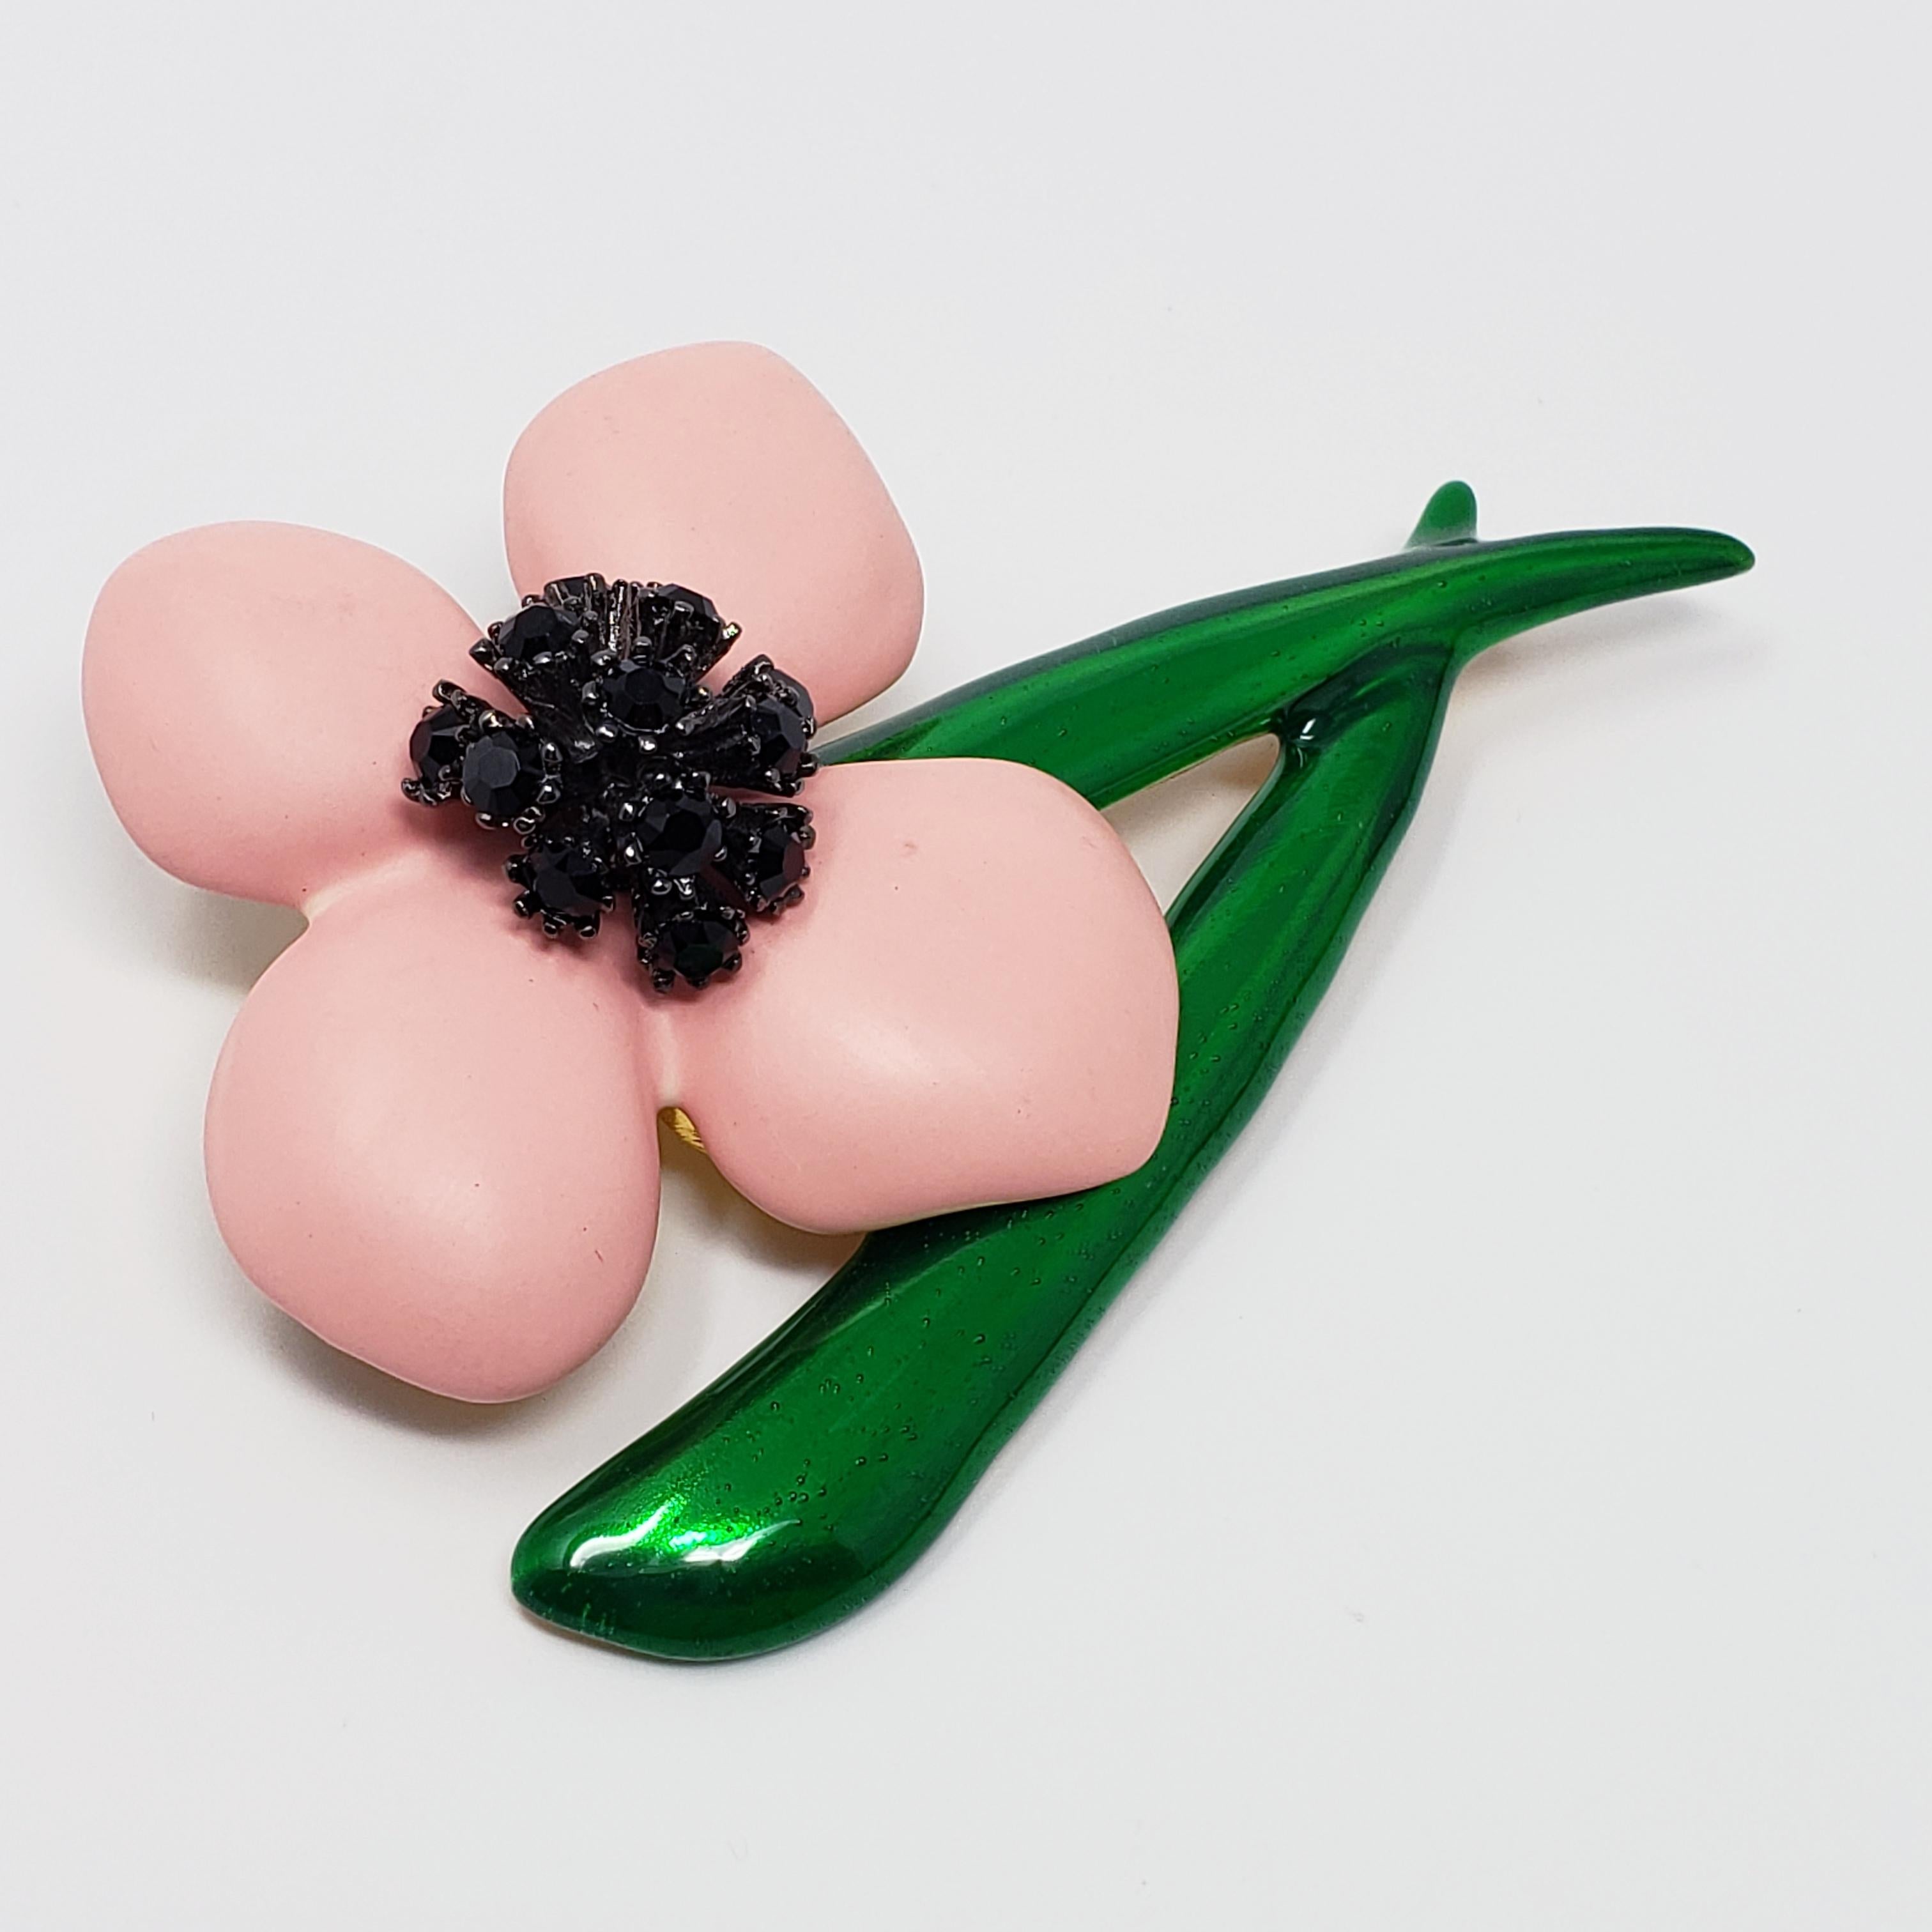 Blooming beauty! A charming brooch from a rare Oscar de la Renta floral collection. The flowers feature soft pink resin petals and a painted green enamel stem. The jet black crystals add striking contrast to this bright and colorful